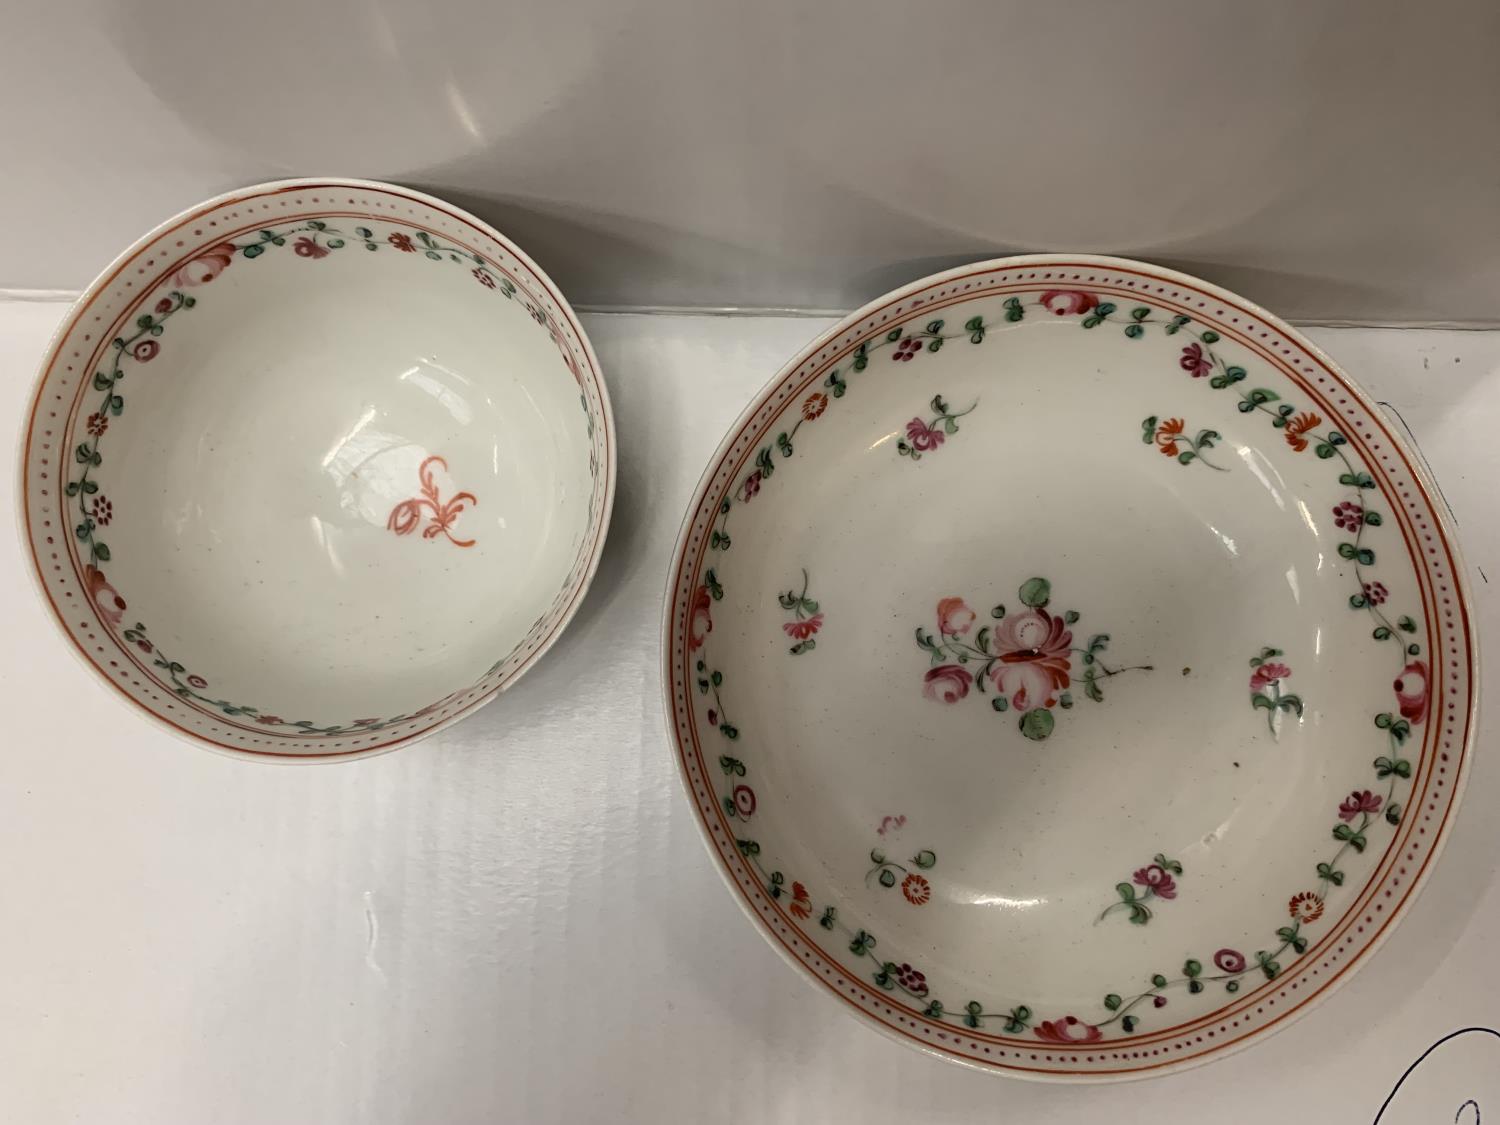 AN 18TH/19TH CENTURY POSSIBLY NEW HALL PORCELAIN TEA BOWL AND SAUCER - Image 2 of 3